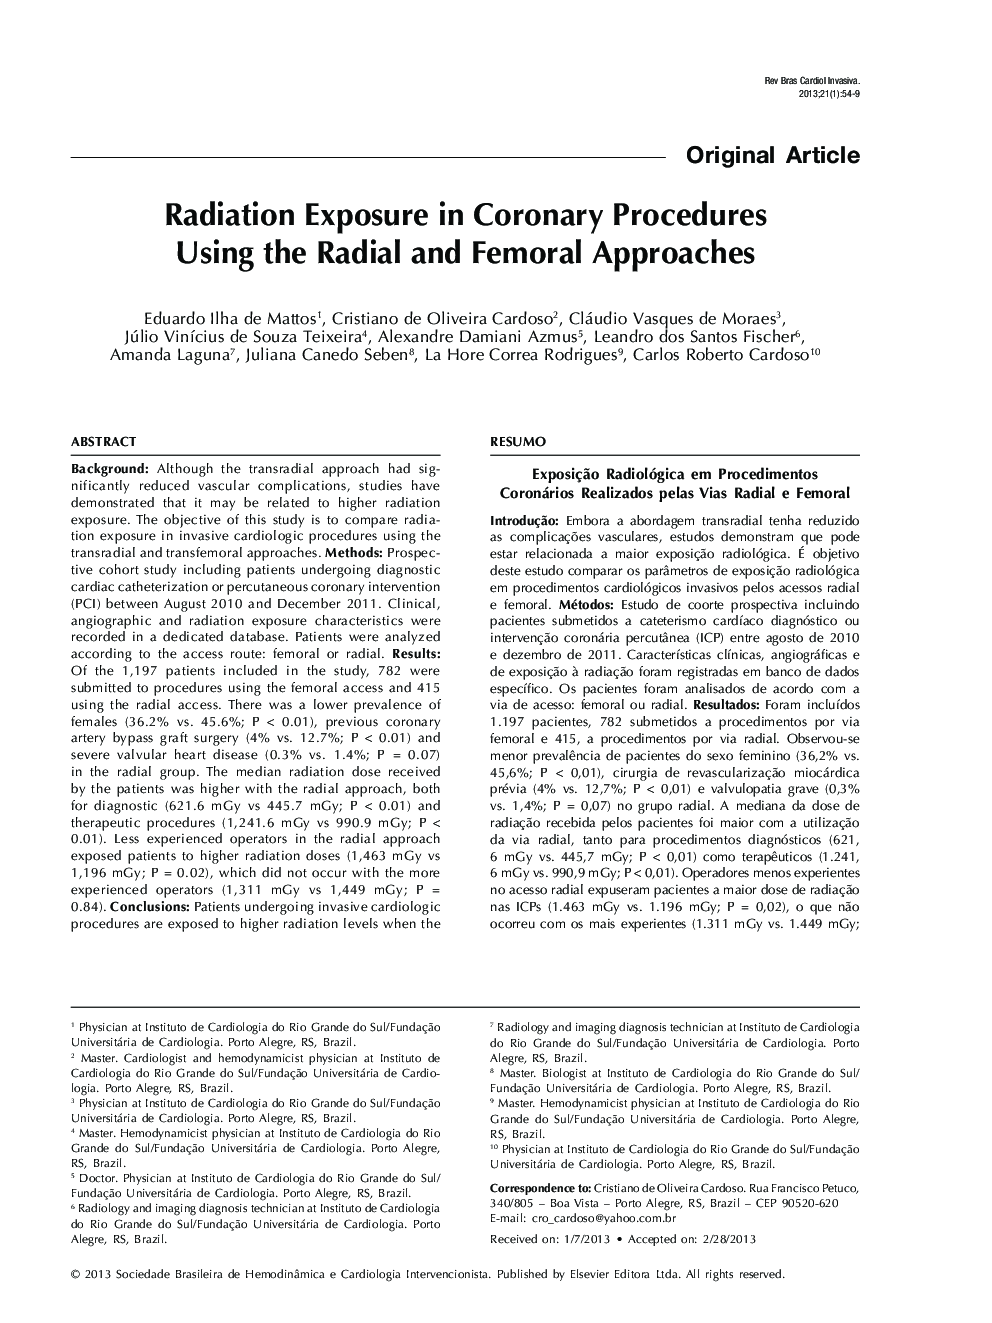 Radiation Exposure in Coronary Procedures Using the Radial and Femoral Approaches